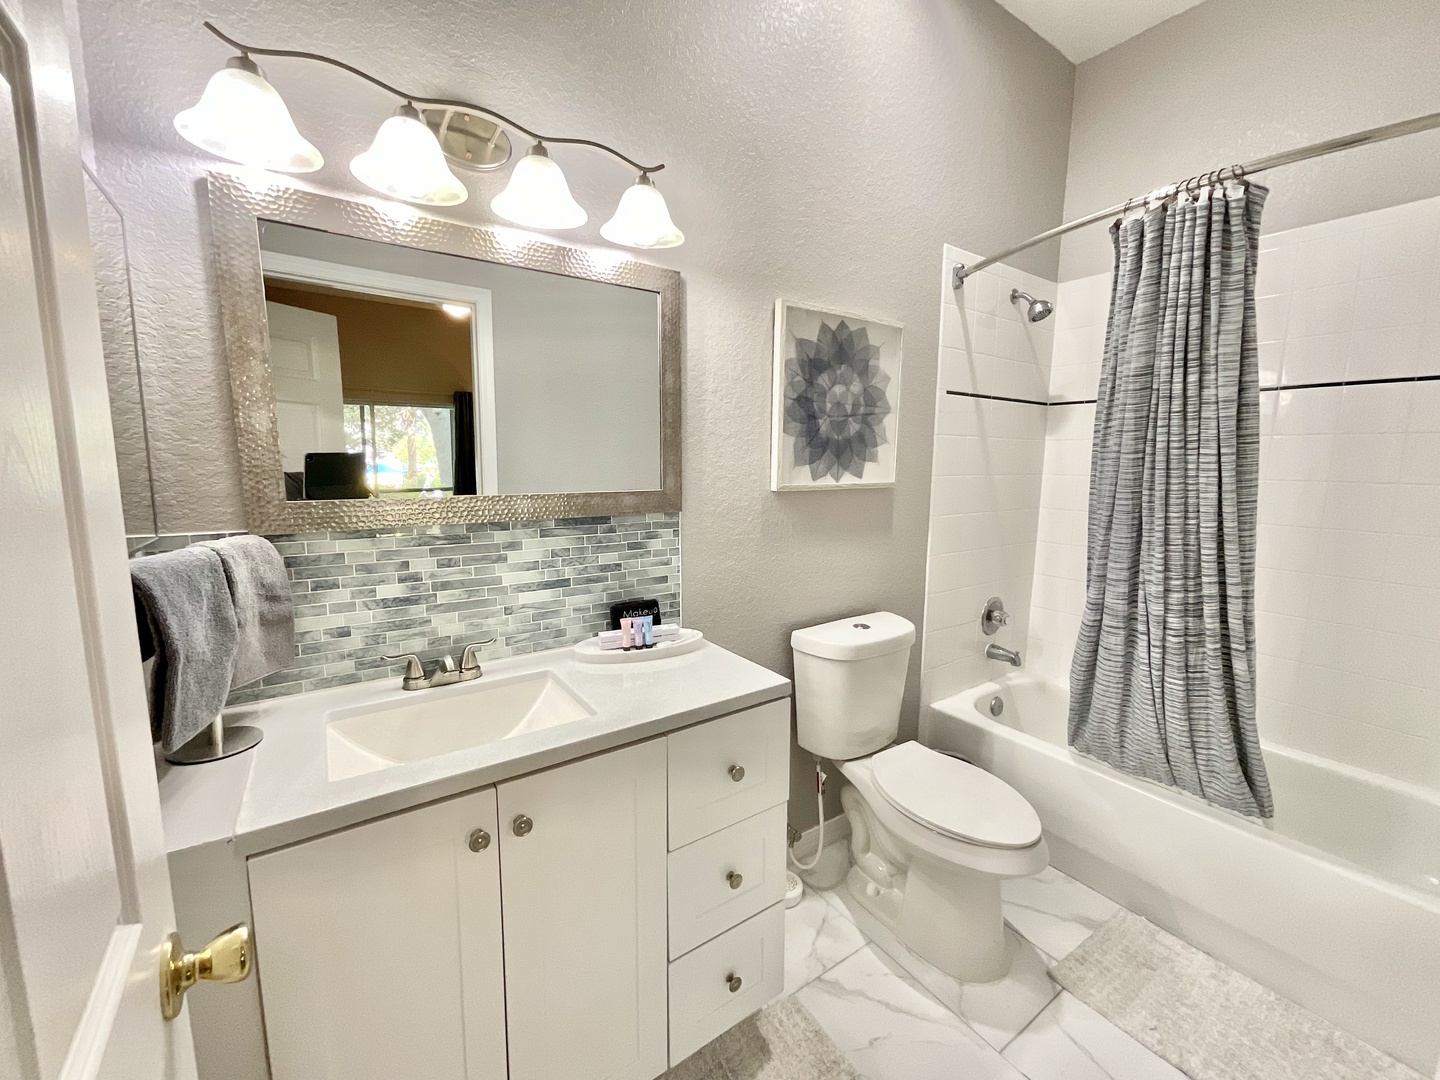 The private king en suite offers a single vanity & shower/tub combo with sleek counter tops and back splash